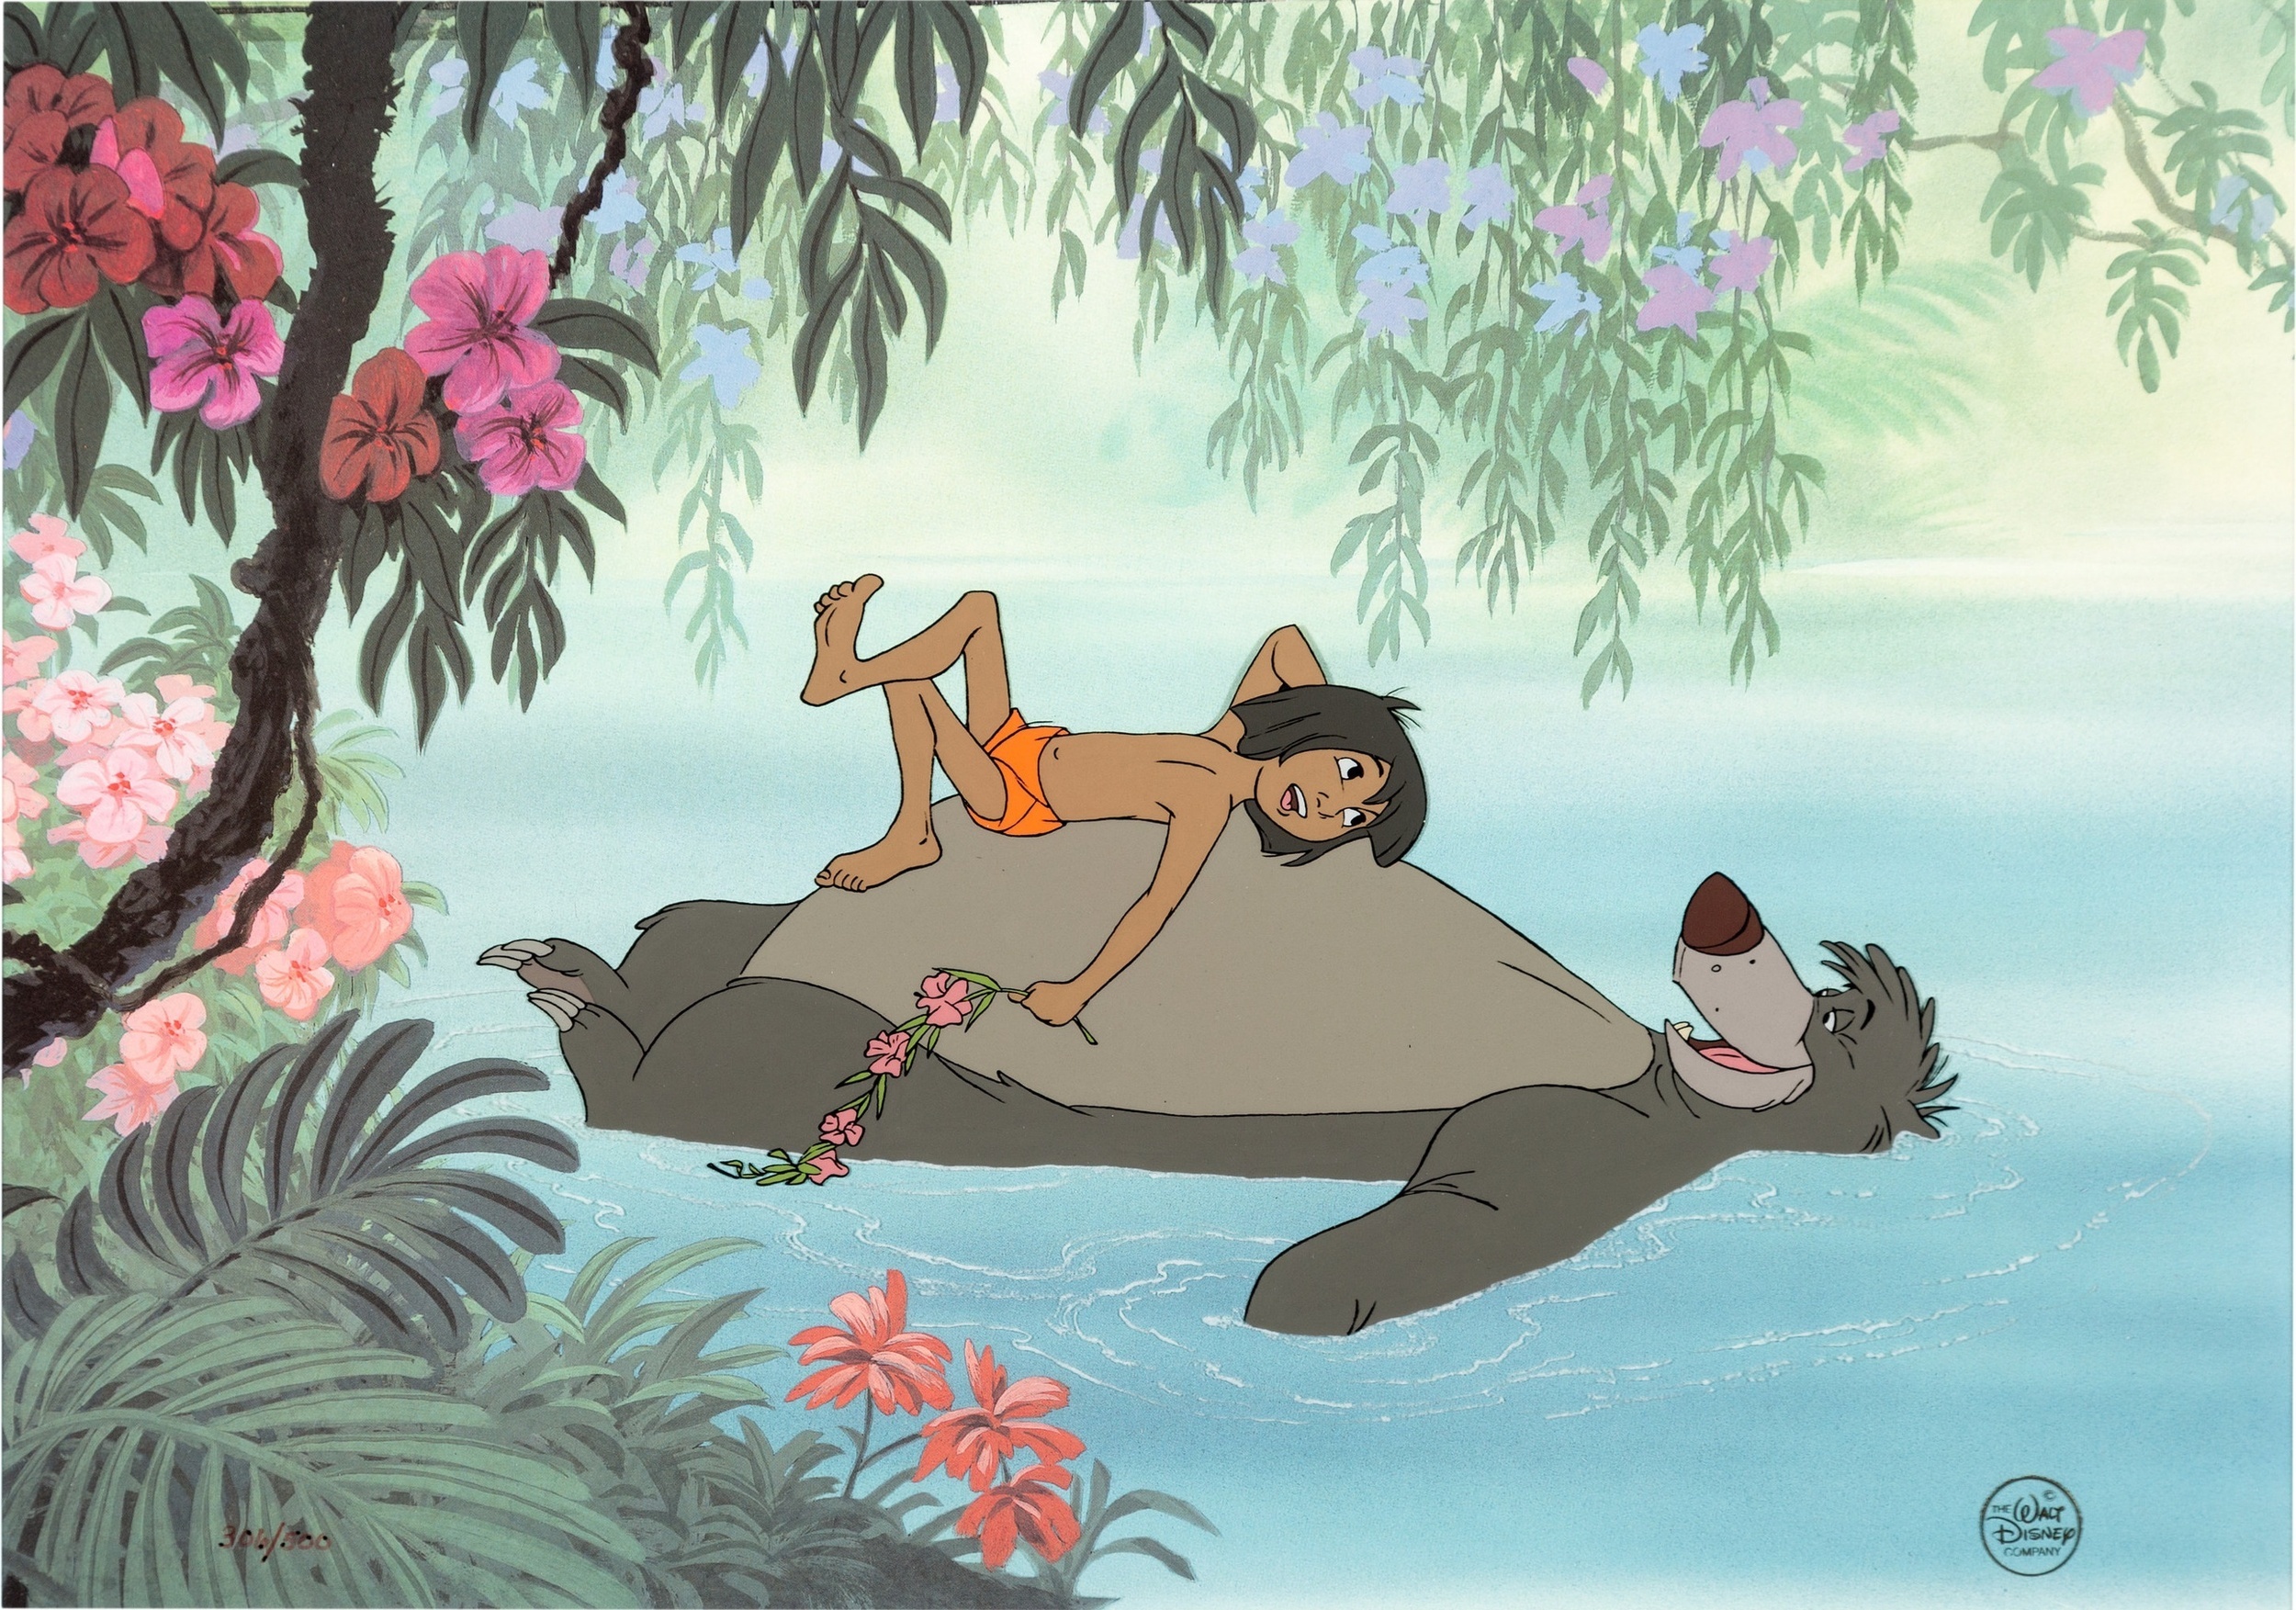 <p>This classic tale based on the works of Rudyard Kipling may be a masterpiece of storytelling, but it carries a sad distinction as the final film overseen by Walt Disney before his passing in 1966. </p><p>The production behind Disney's <em>Jungle Book</em> feature is one of the most challenging in the studio's history. The scripts went through several rewrites because they had to meet the high bar set by Kipling's work and Disney himself. The struggle to find the right tone between meeting Disney's expectations and paying homage to Kipling's iconic work almost derailed the movie. The music ended up saving the whole project. Songs like "The Bare Necessities" and "I Wanna Be Like You," sung by jazz great Louis Prima, gave the film its sense of whimsy and comedy and breathed life into characters like Baloo the Bear and King Louie while the storyline stuck with Kipling's original vision. It's become one of Disney's most beloved and successful films. </p><p>You may also like: <a href='https://www.yardbarker.com/entertainment/articles/the_greatest_yacht_rock_songs_of_all_time_040624/s1__38322620'>The greatest Yacht Rock songs of all time</a></p>